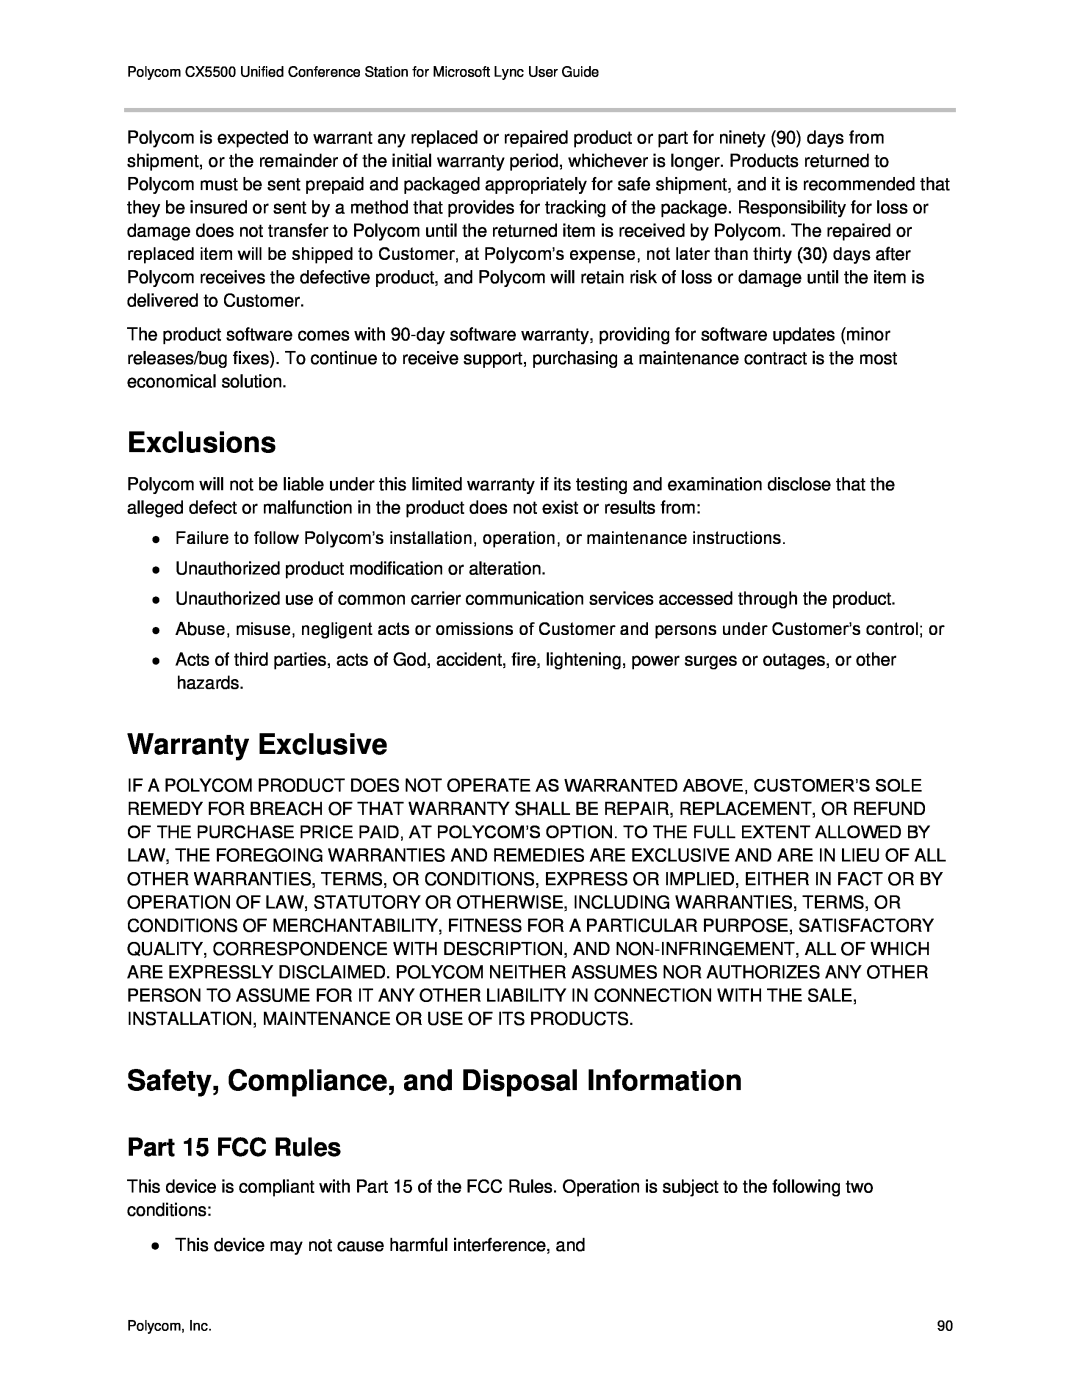 Polycom CX5500 manual Exclusions, Warranty Exclusive, Safety, Compliance, and Disposal Information, Part 15 FCC Rules 